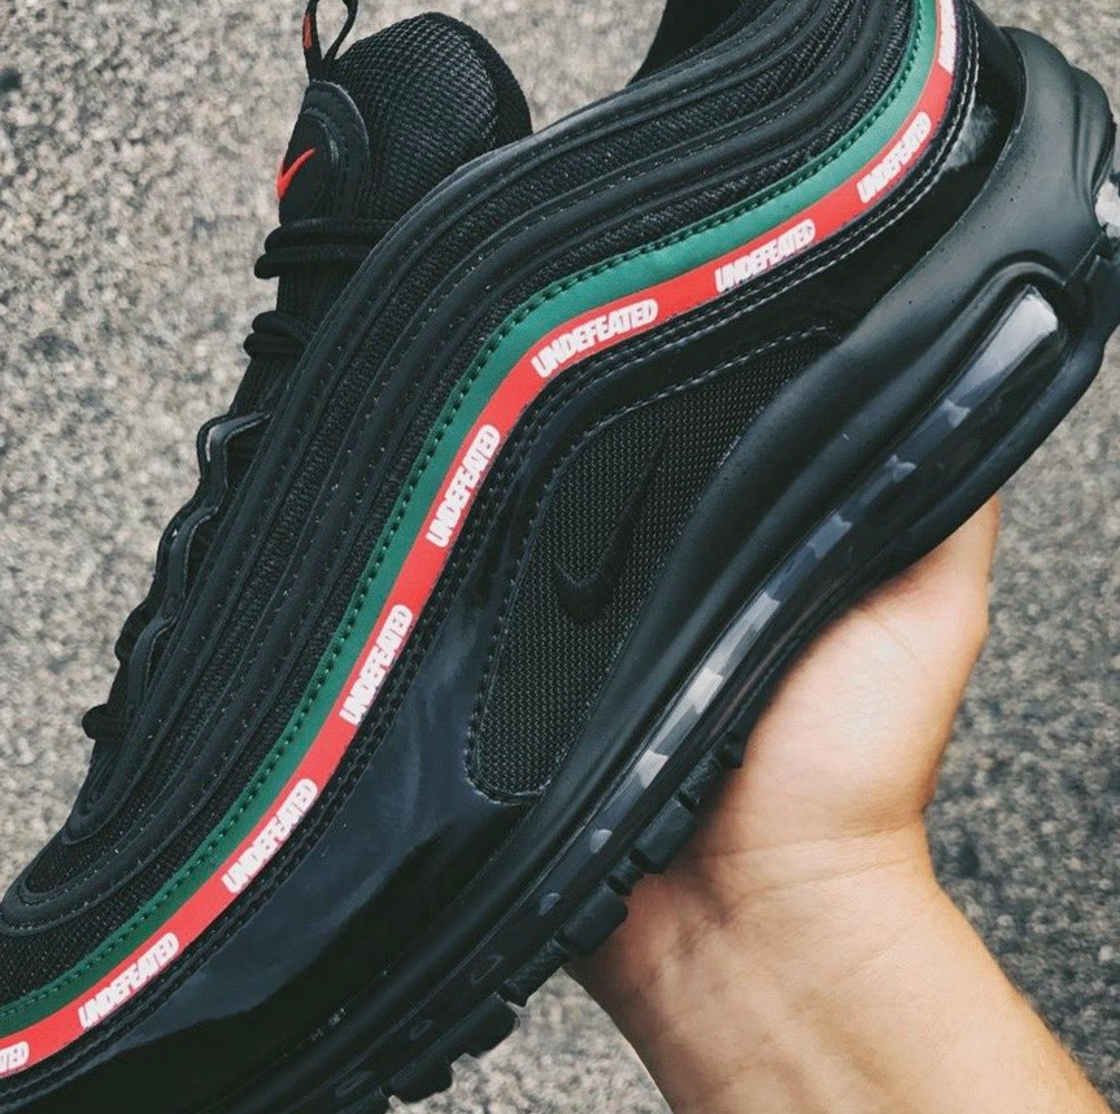 An UNDEFEATED x Nike Air Max 97 Collaboration Has Been Leaked